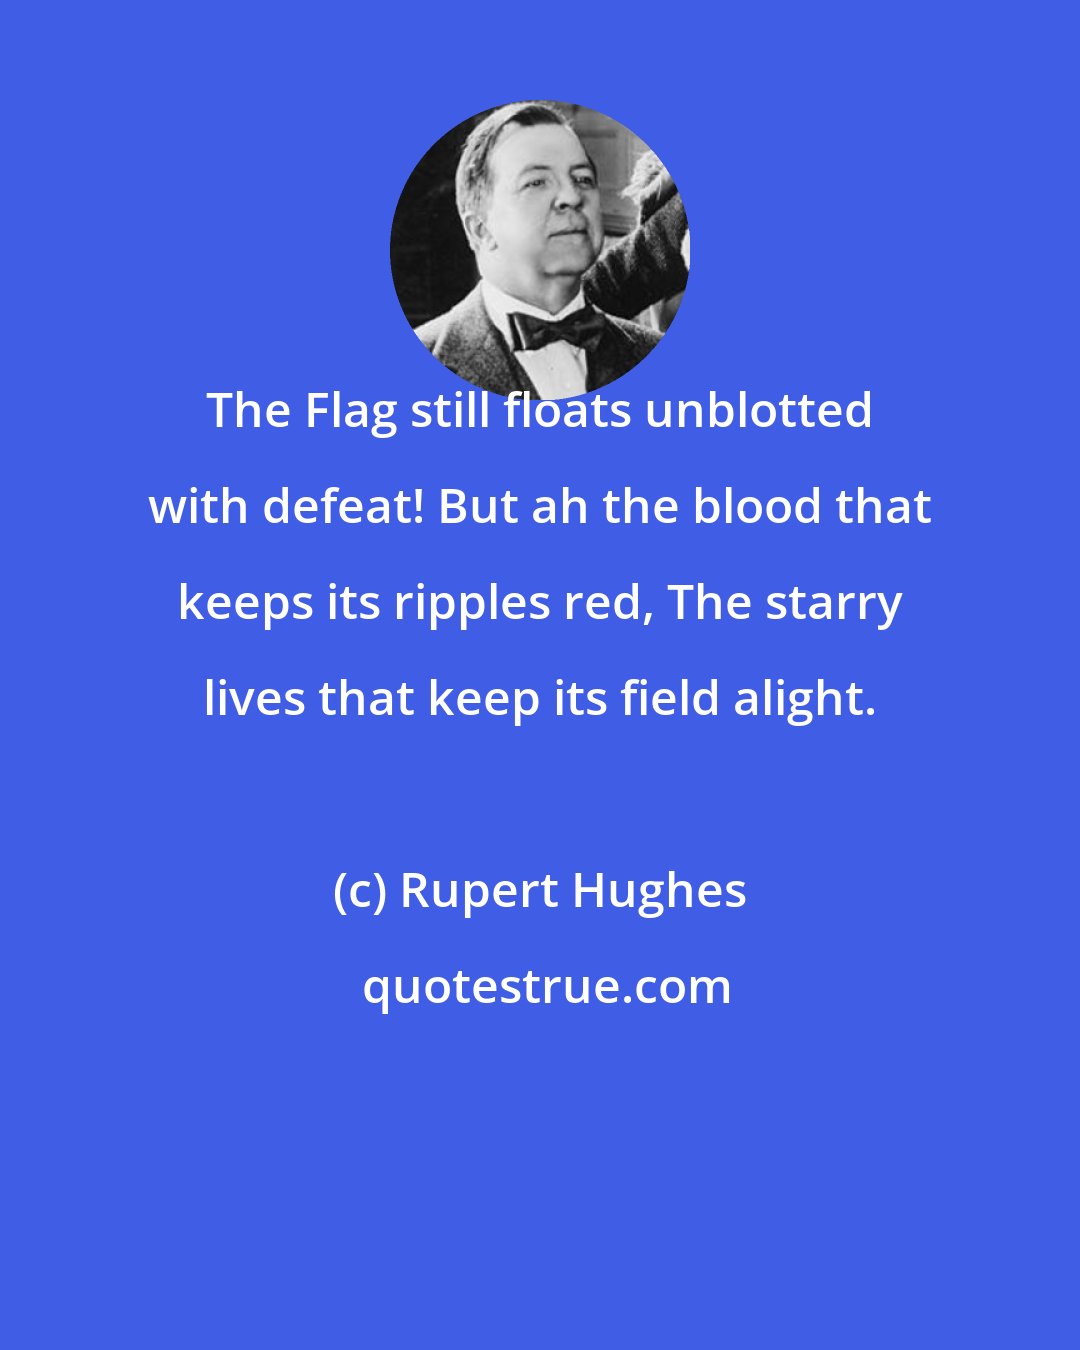 Rupert Hughes: The Flag still floats unblotted with defeat! But ah the blood that keeps its ripples red, The starry lives that keep its field alight.